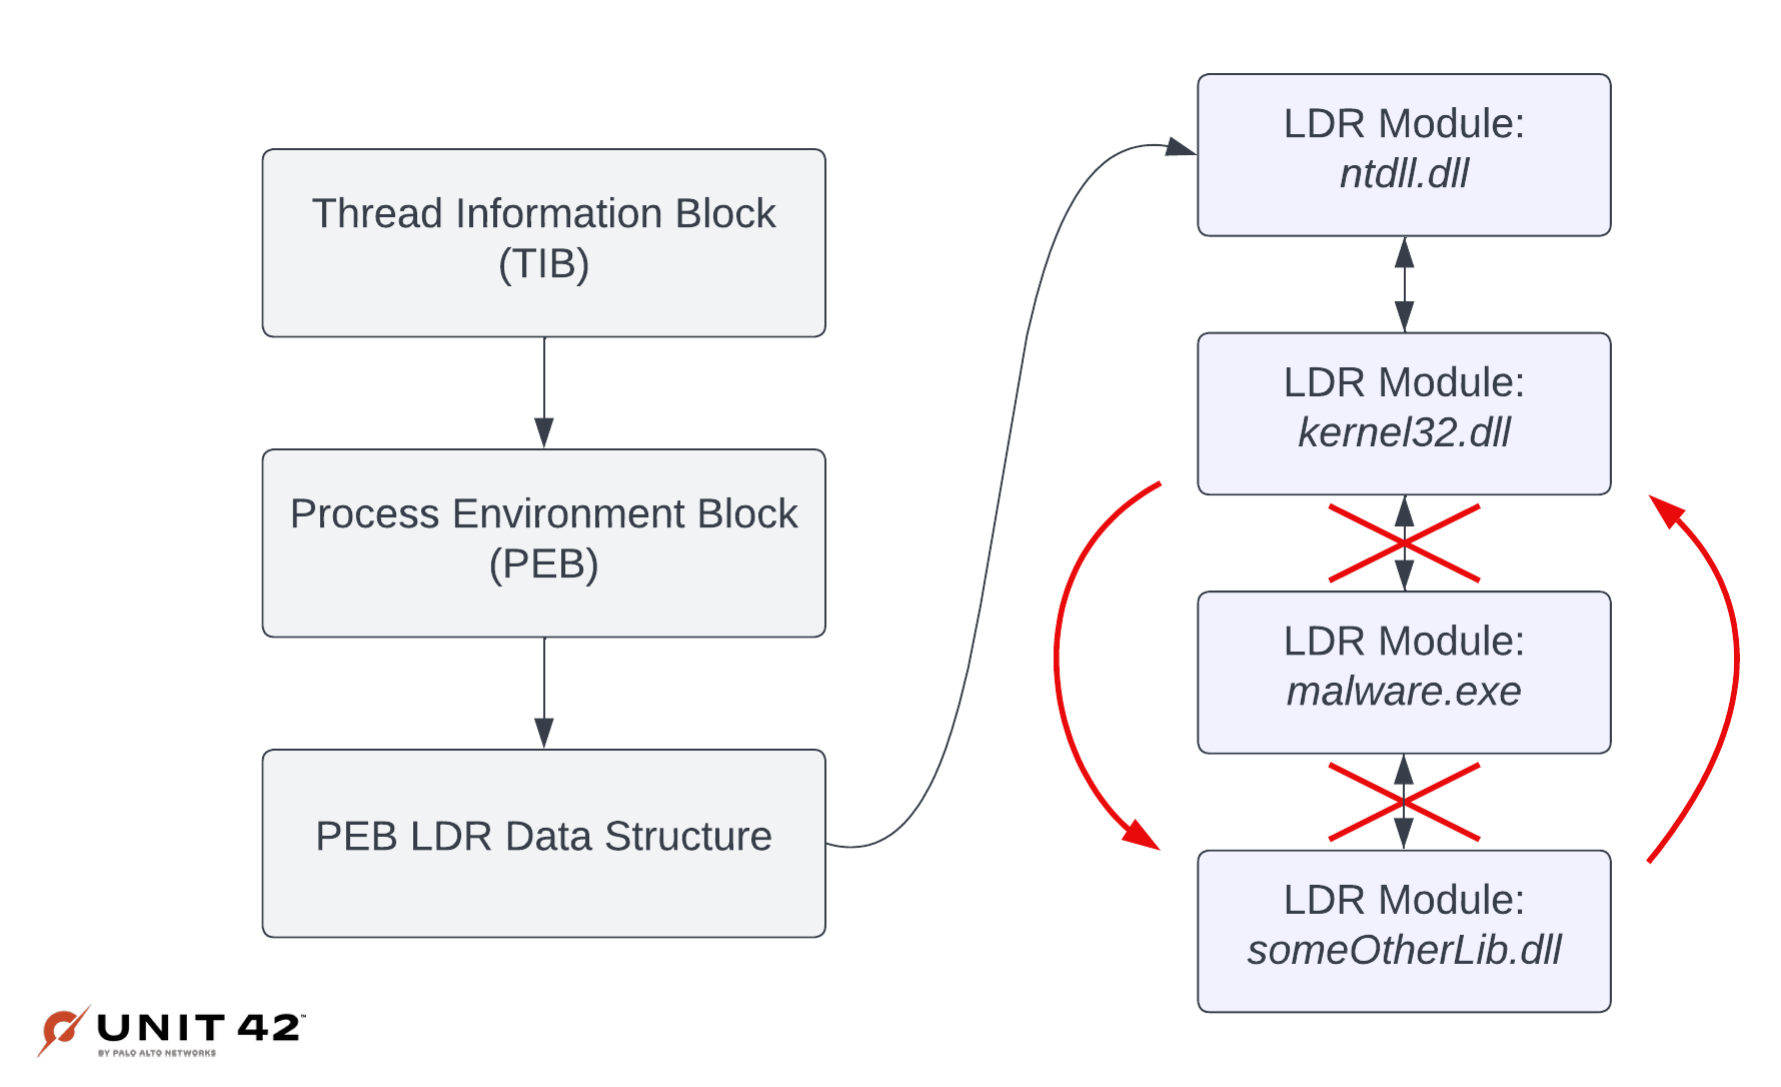 This image shows three fields on the left indicating the progression from the thread information block to the PEB LDR data structure. An arrow shows the progression from the Data Structure to the LDR Modules. The LDR Module ntdll.dll moves to LDR Module kernel32.dll and unhooks it from the malware to replace it with a separate .dll.